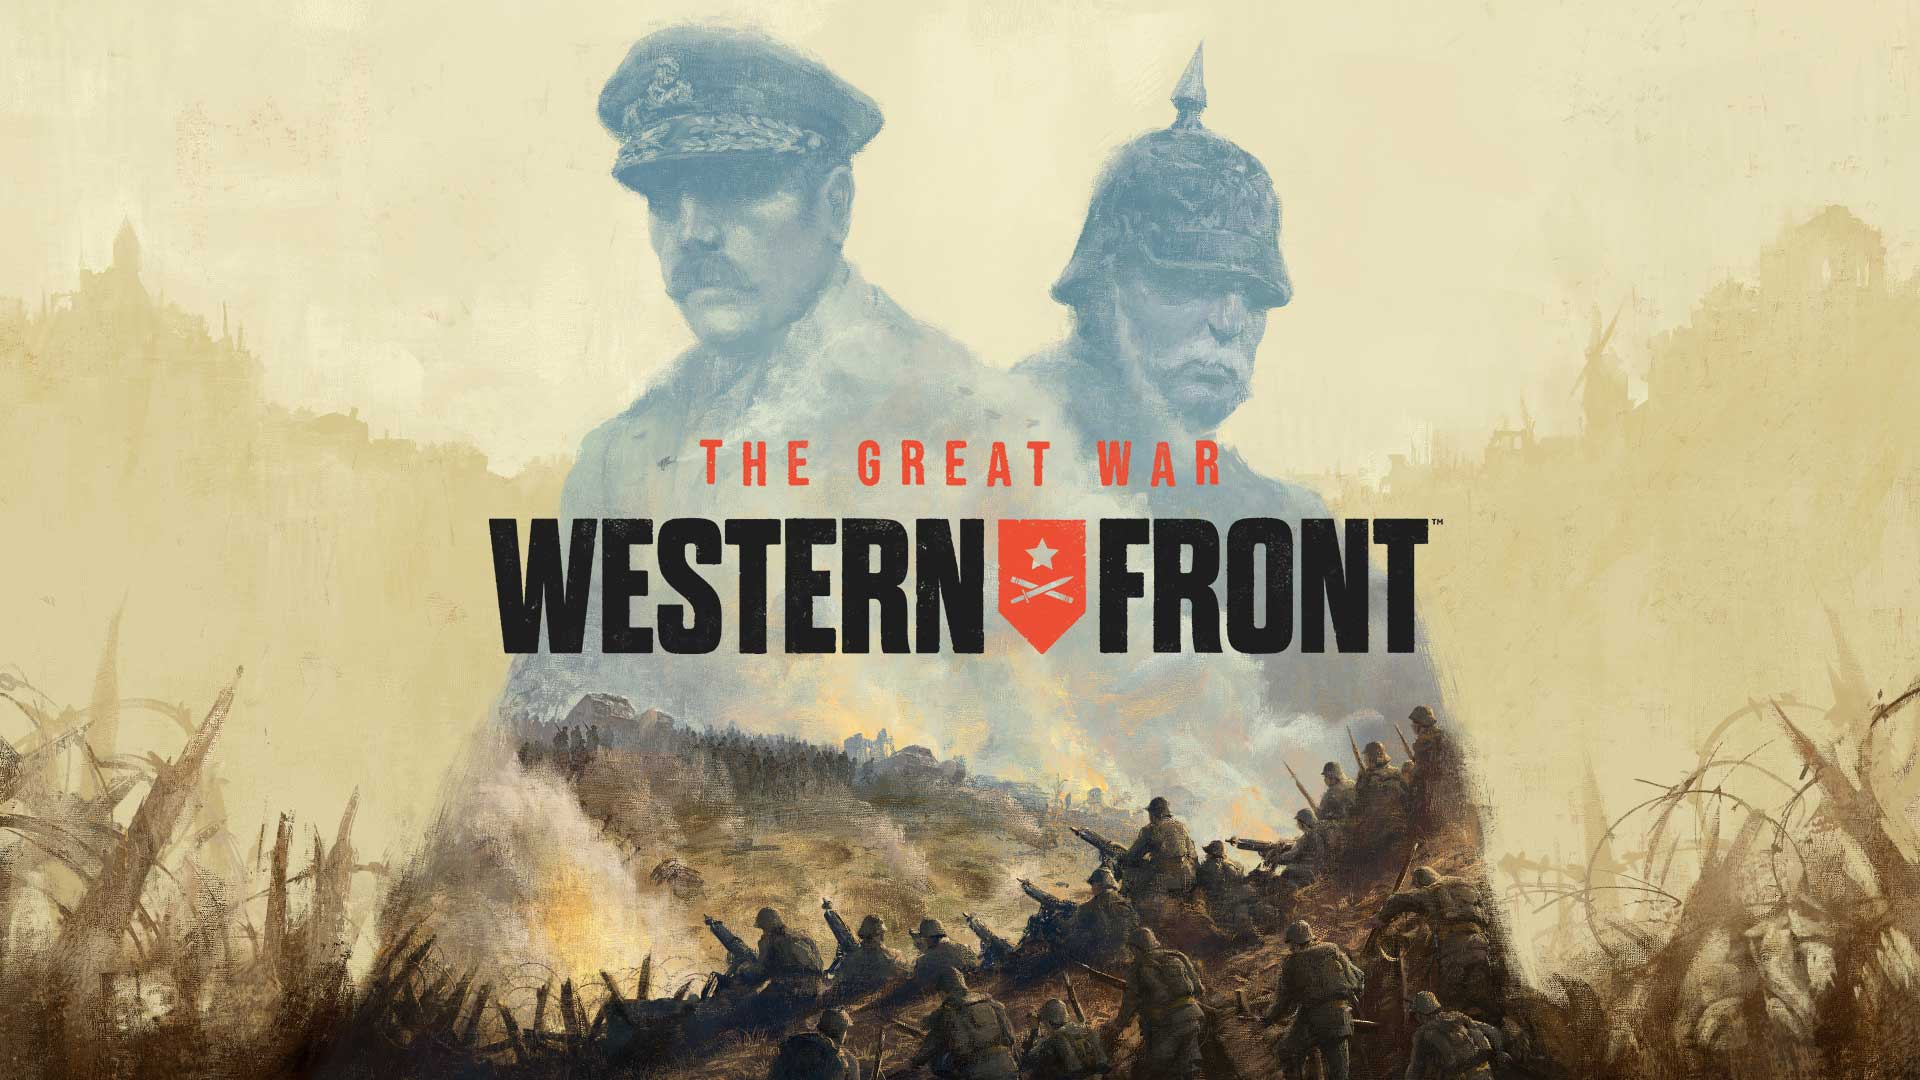  The Great War: Western Front    Command & Conquer        